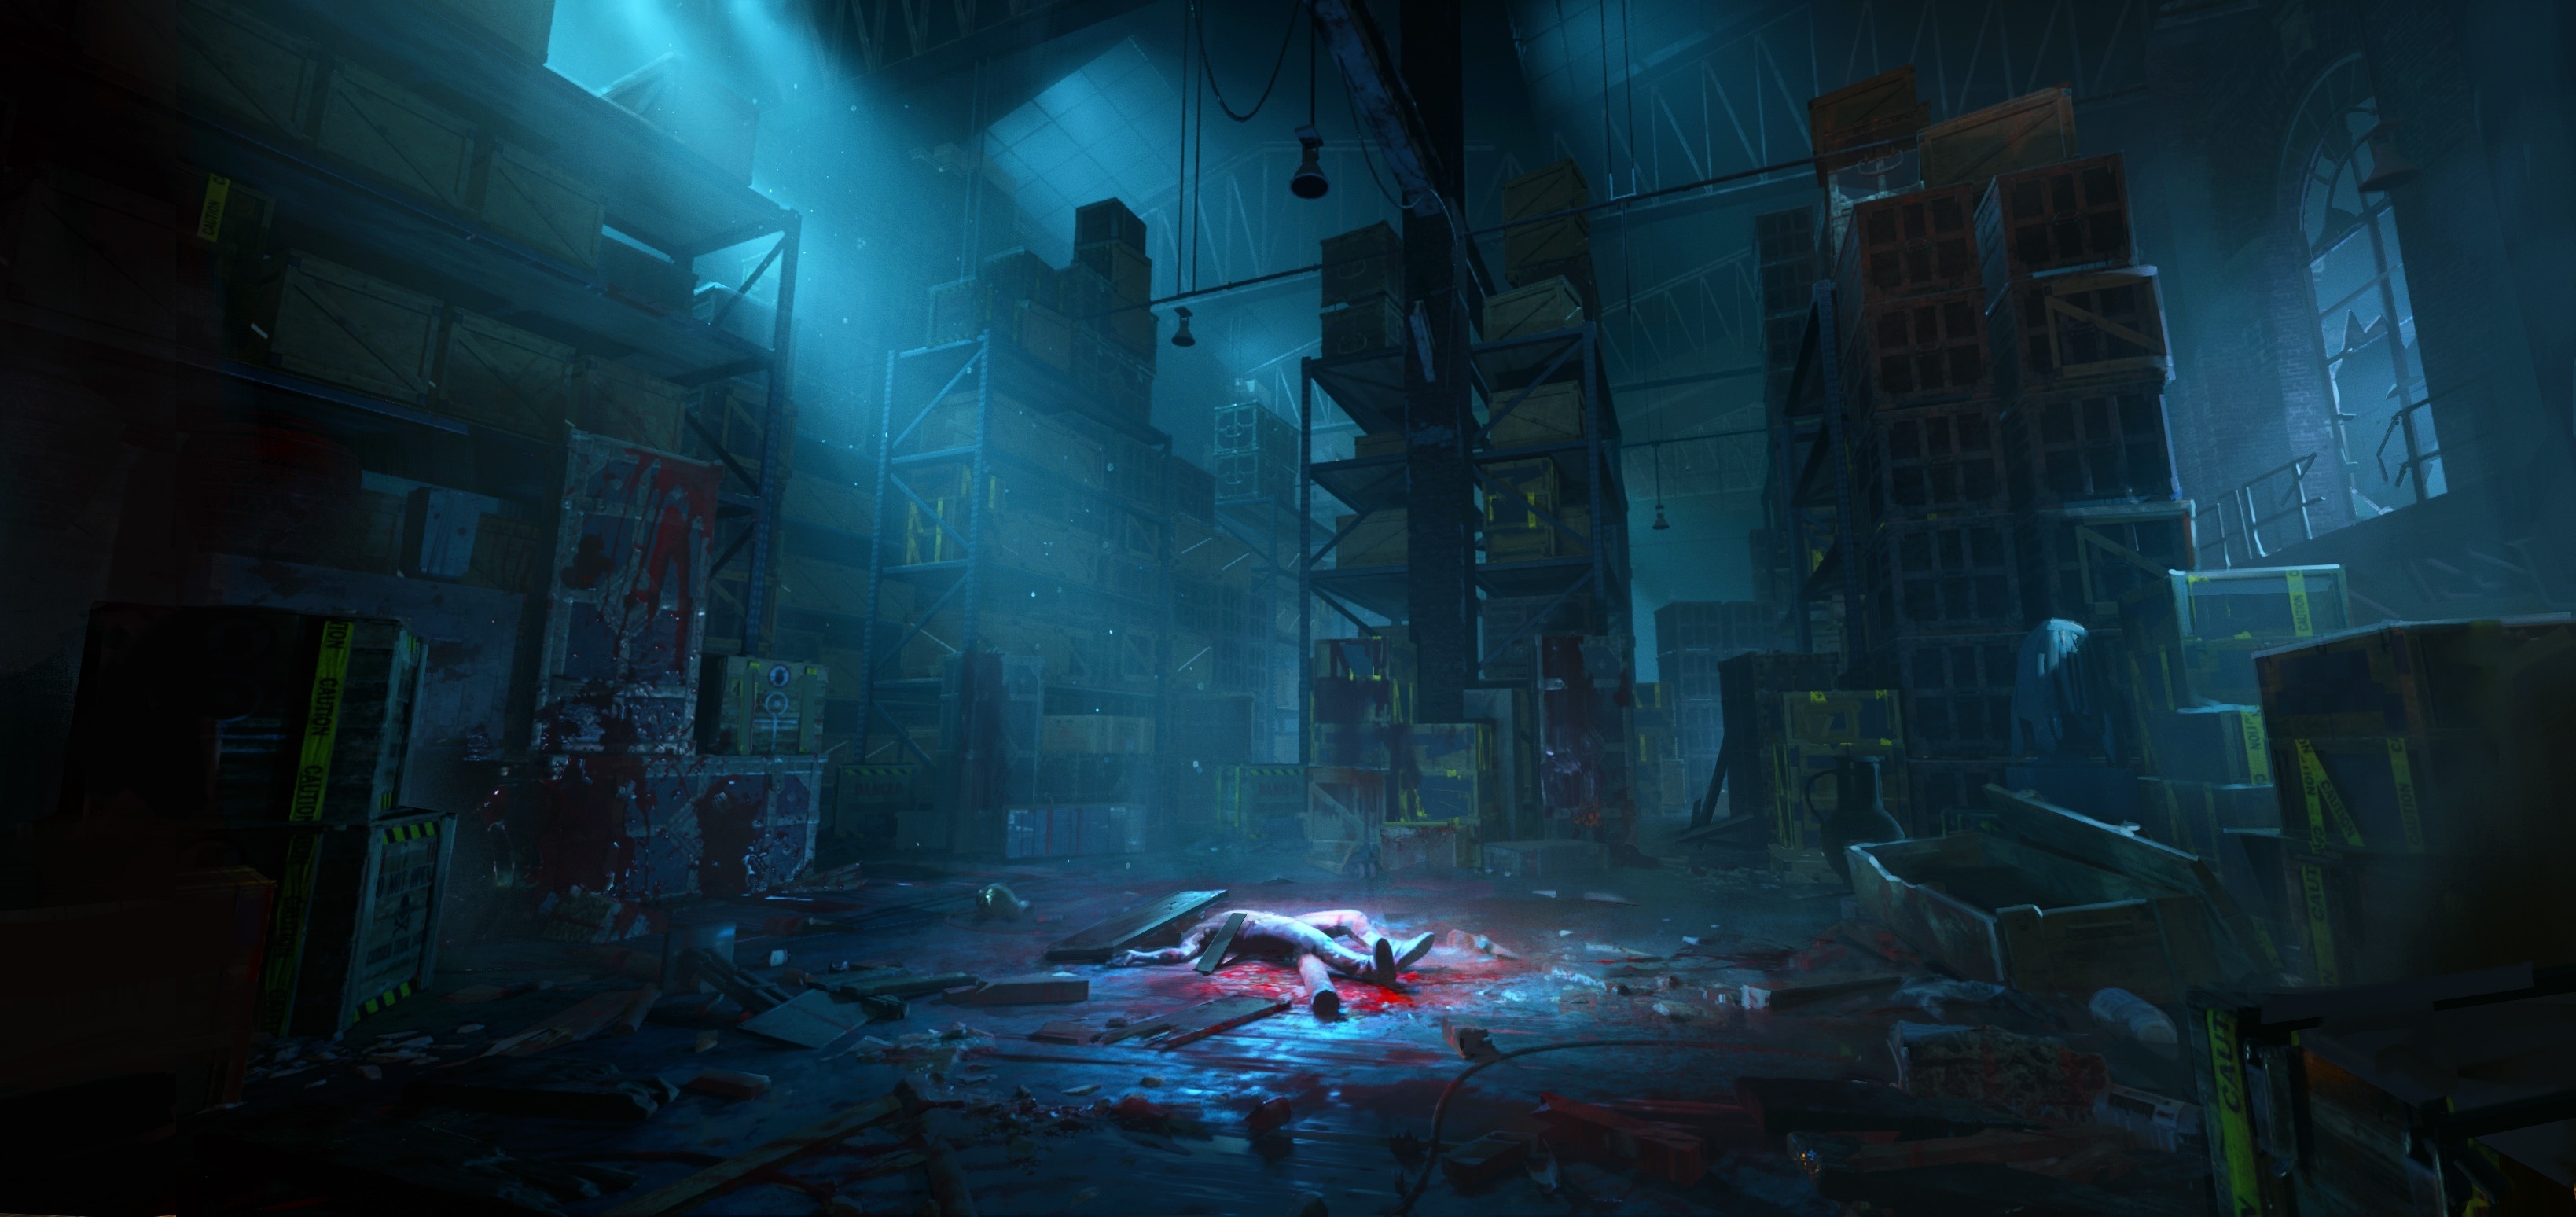 concept art of dead body in industrial setting